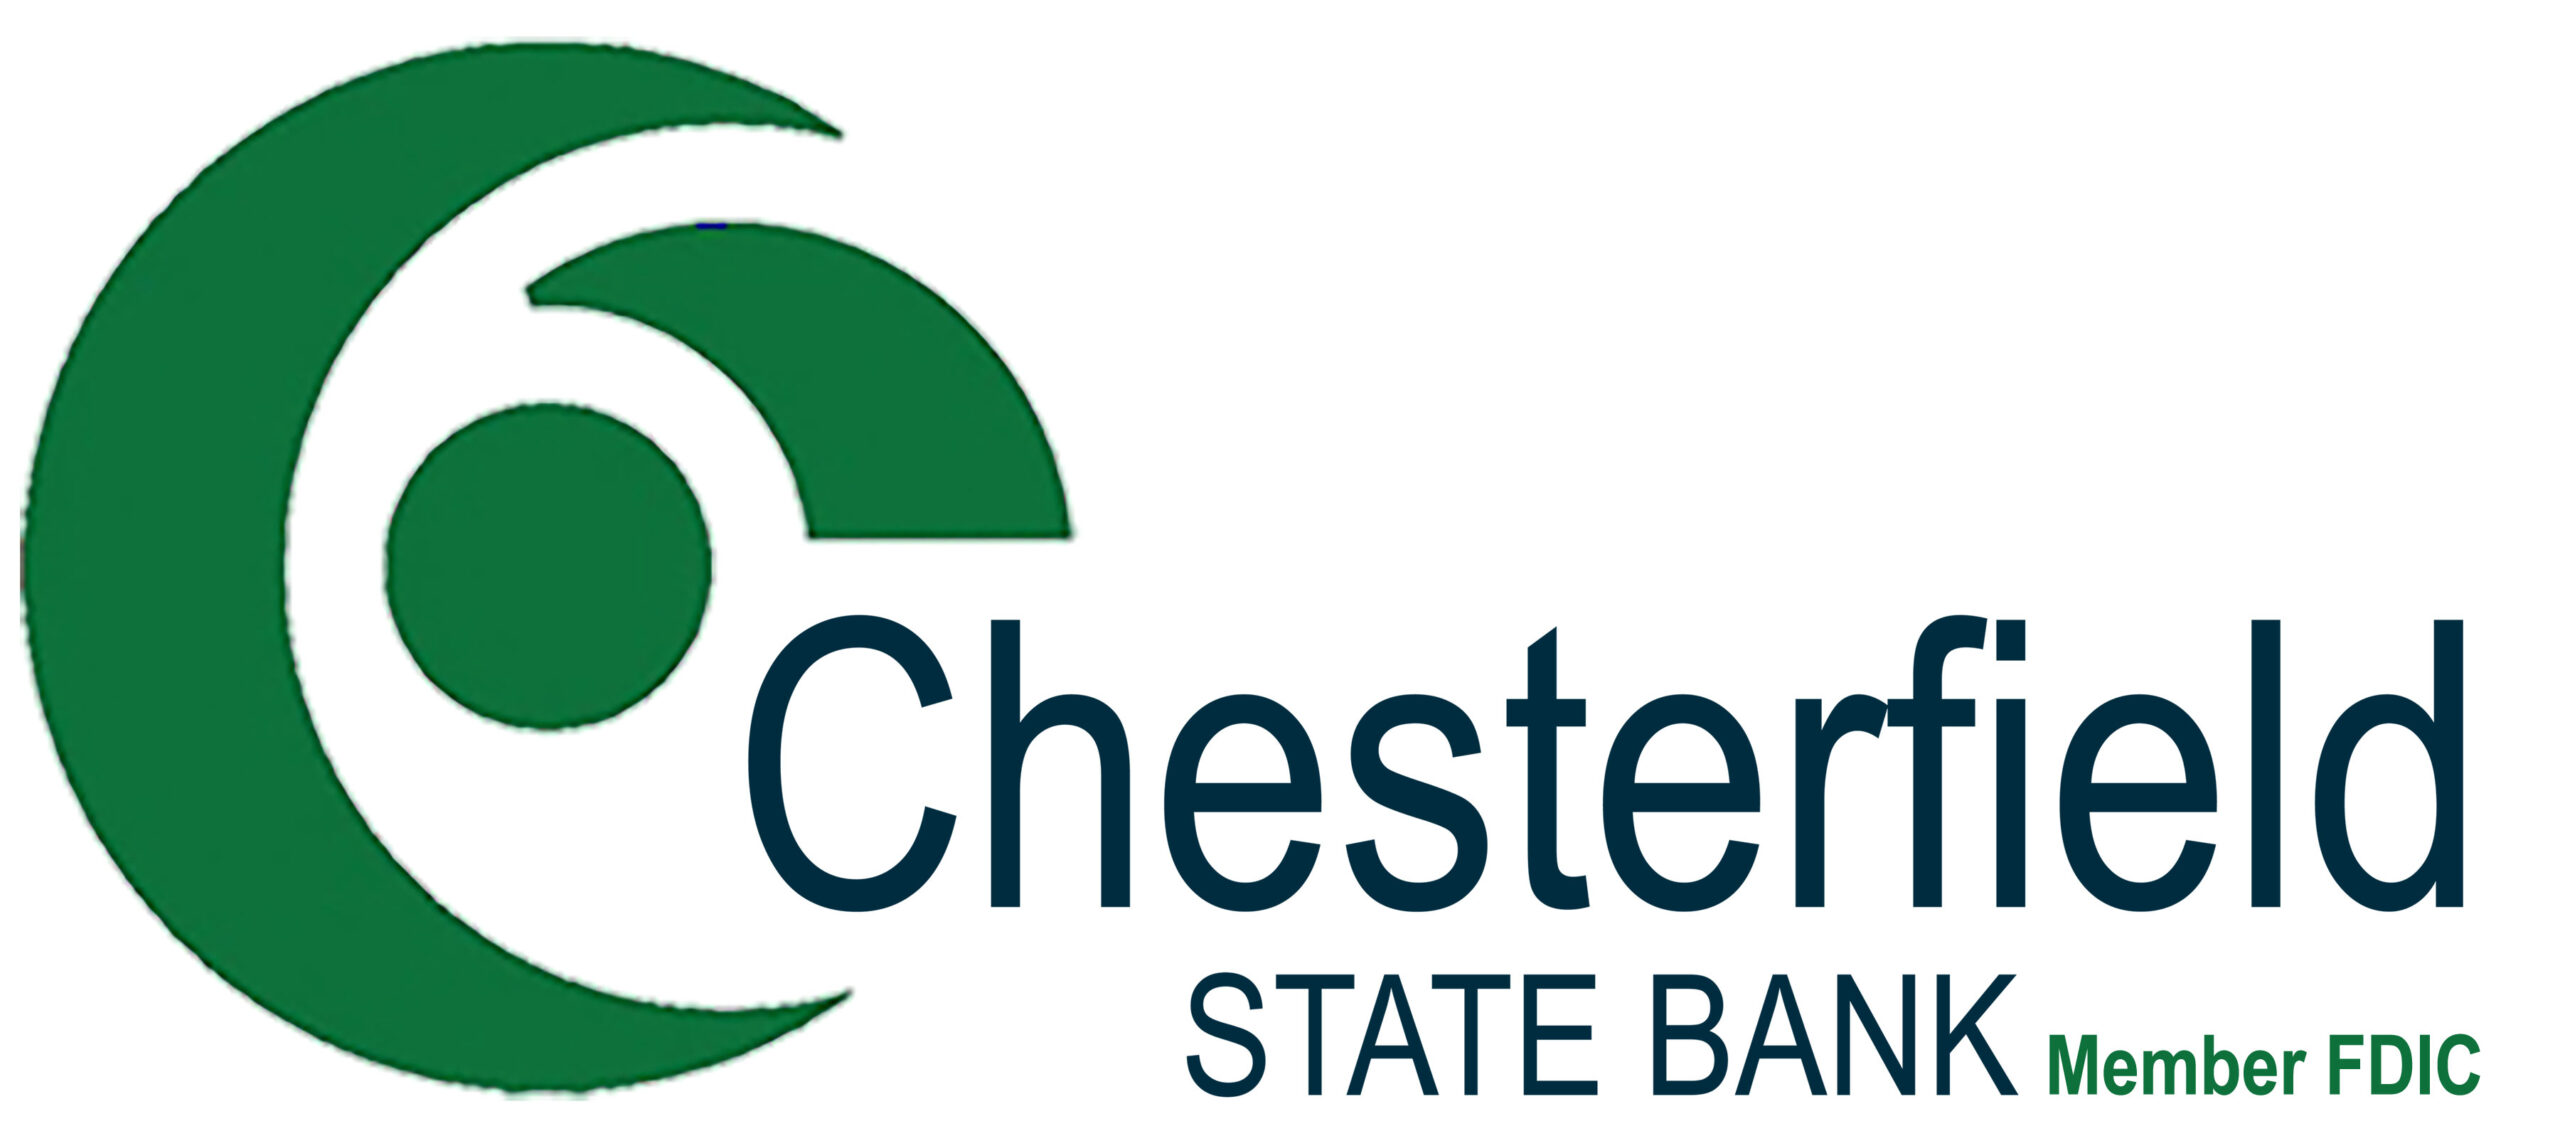 Chesterfield State Bank Member FDIC